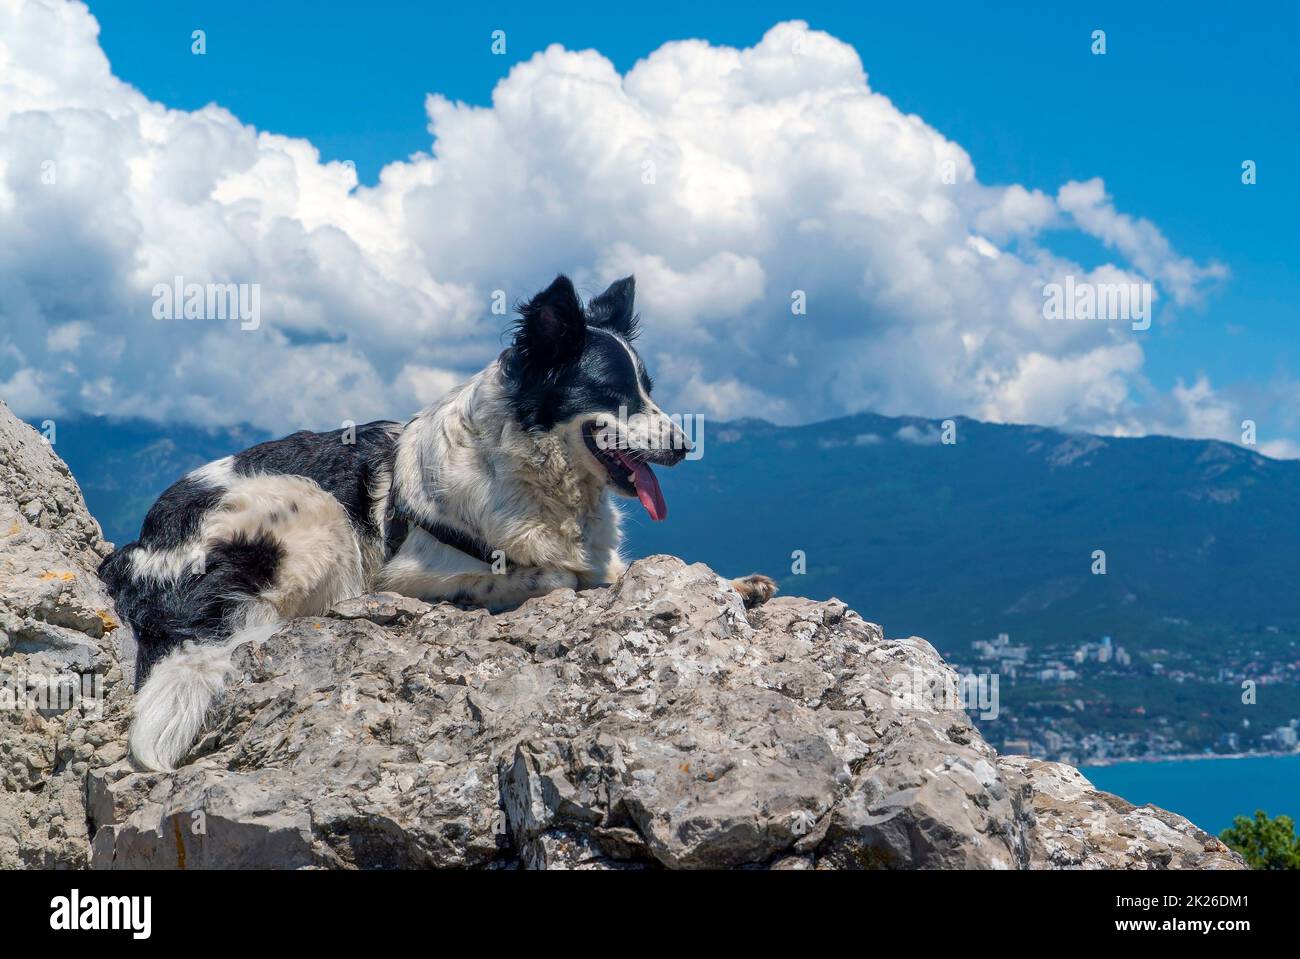 The dog is lying on a large stone against the background of mountains and white clouds. Stock Photo